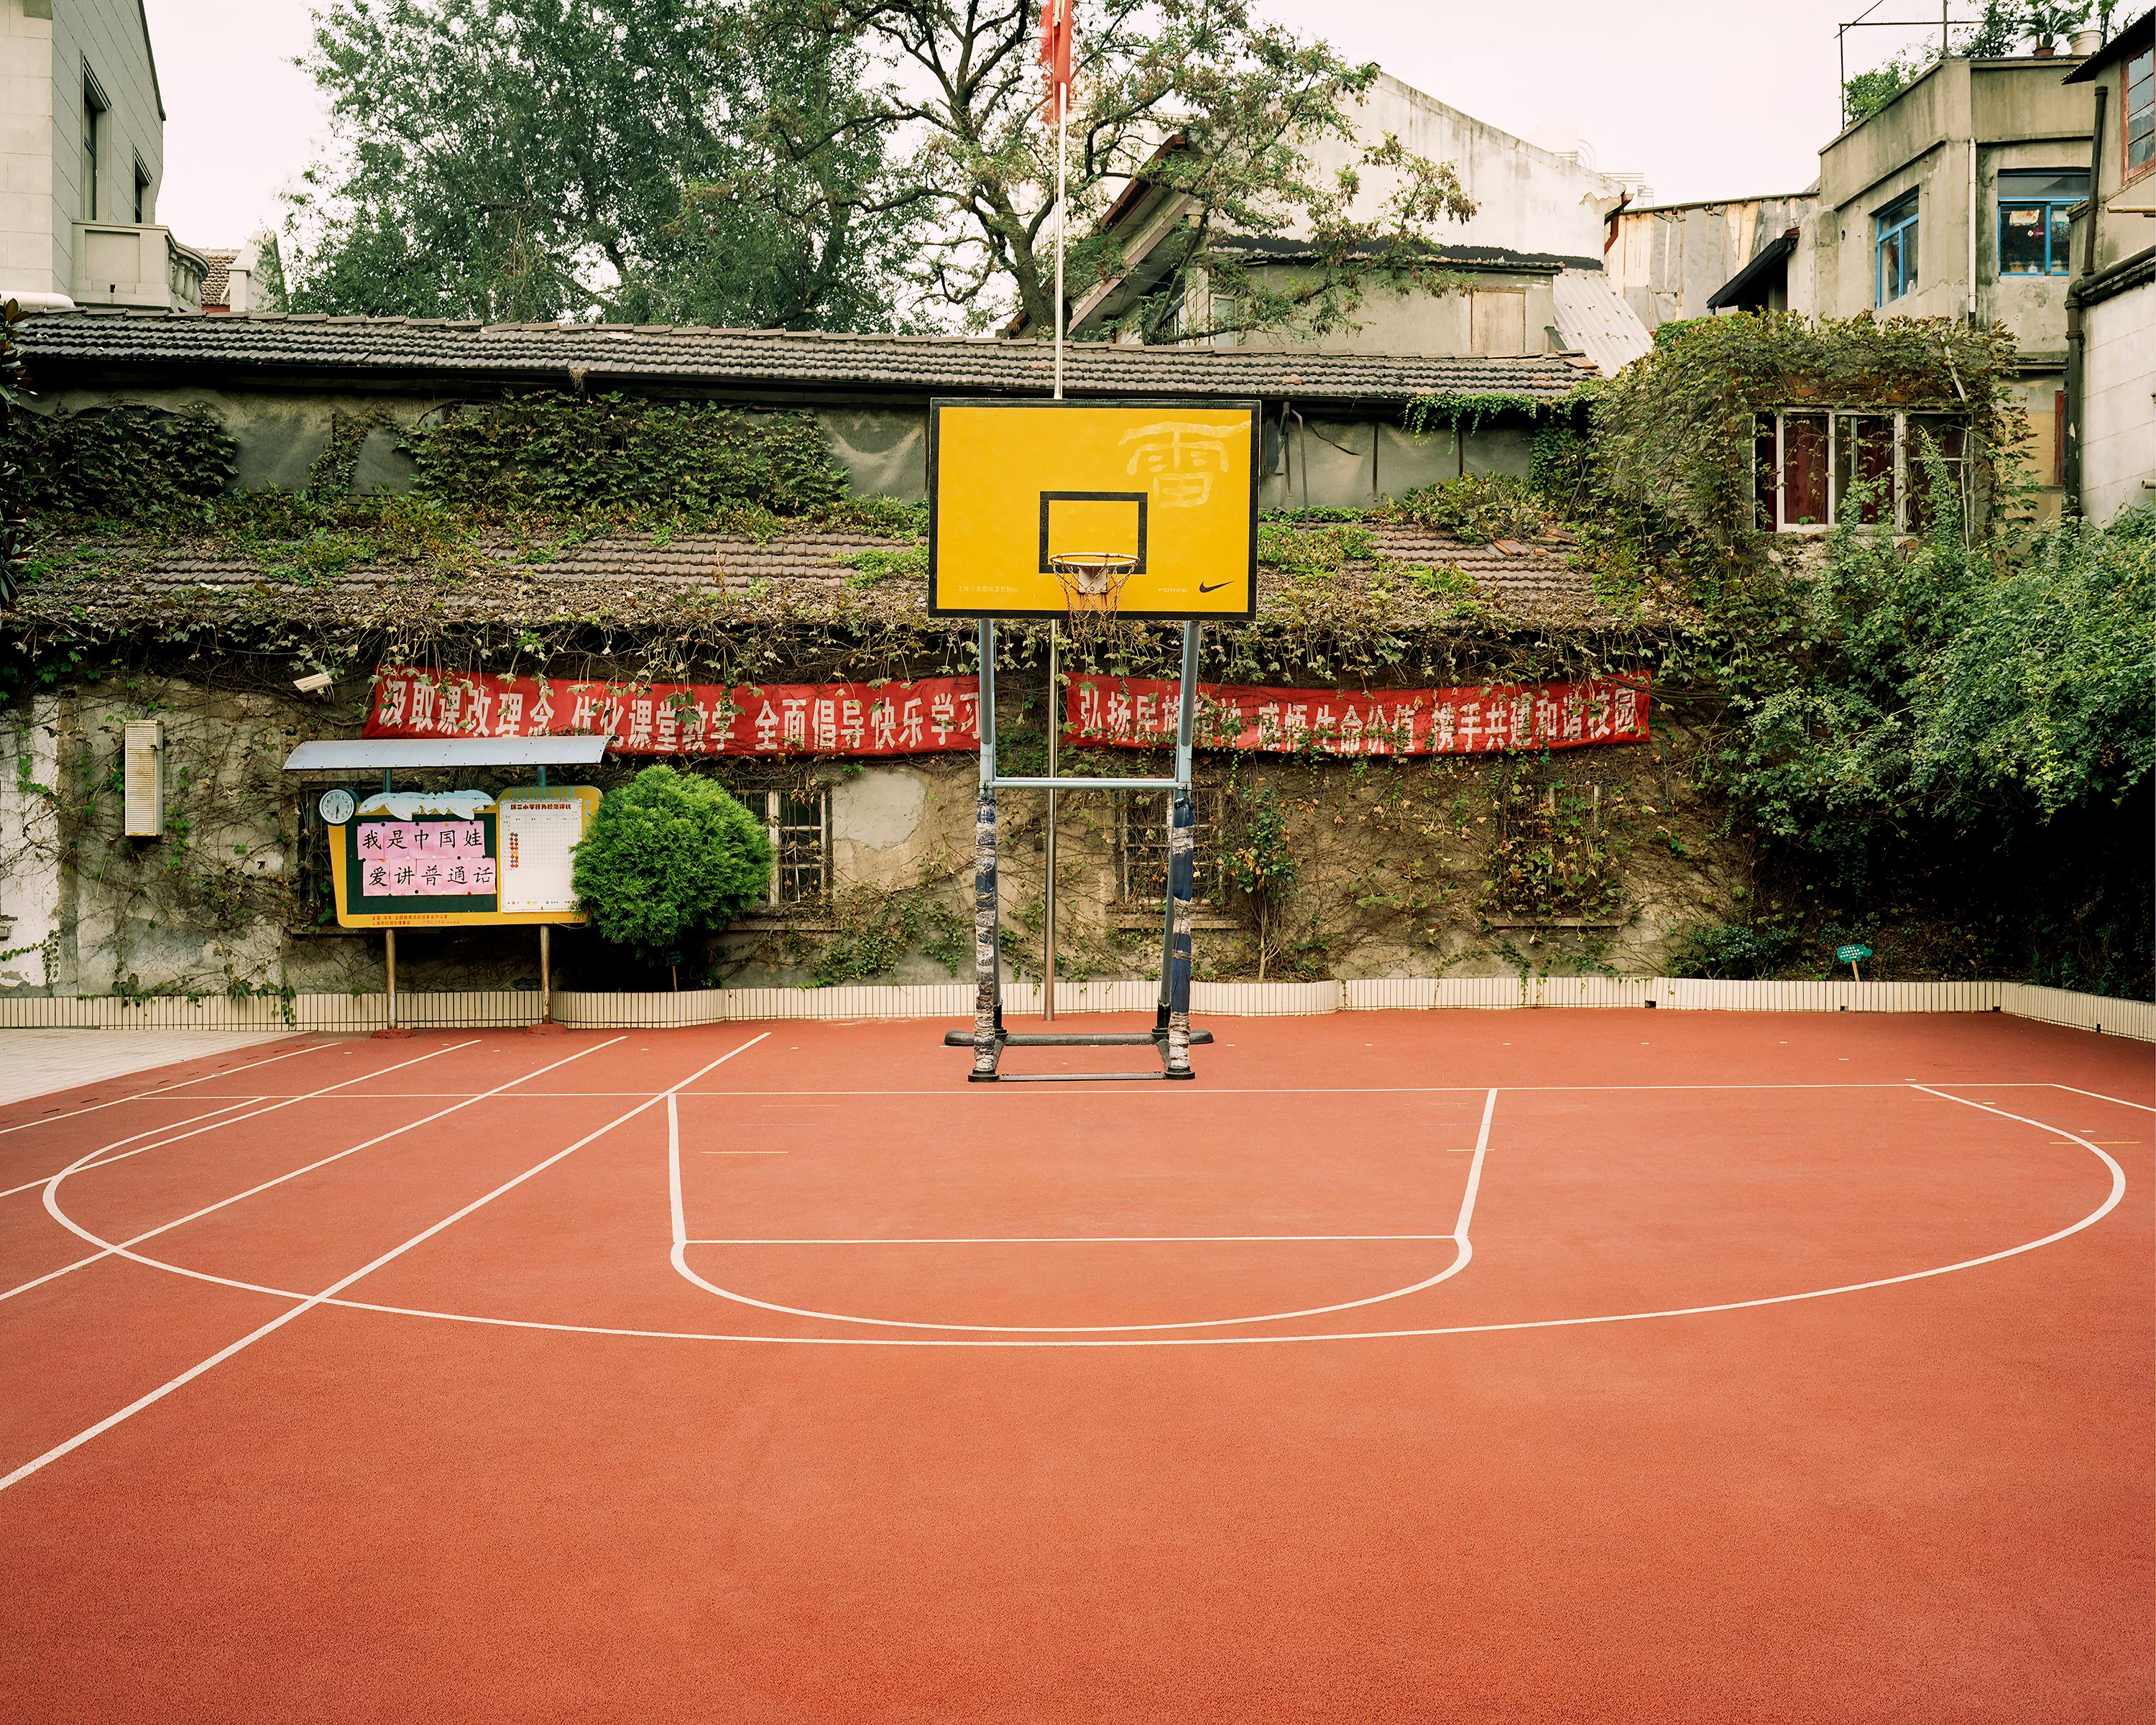 Sean Hemmerle Color Photograph - "Shanghai, China, 2006" HOOPS basketball court limited edition photograph